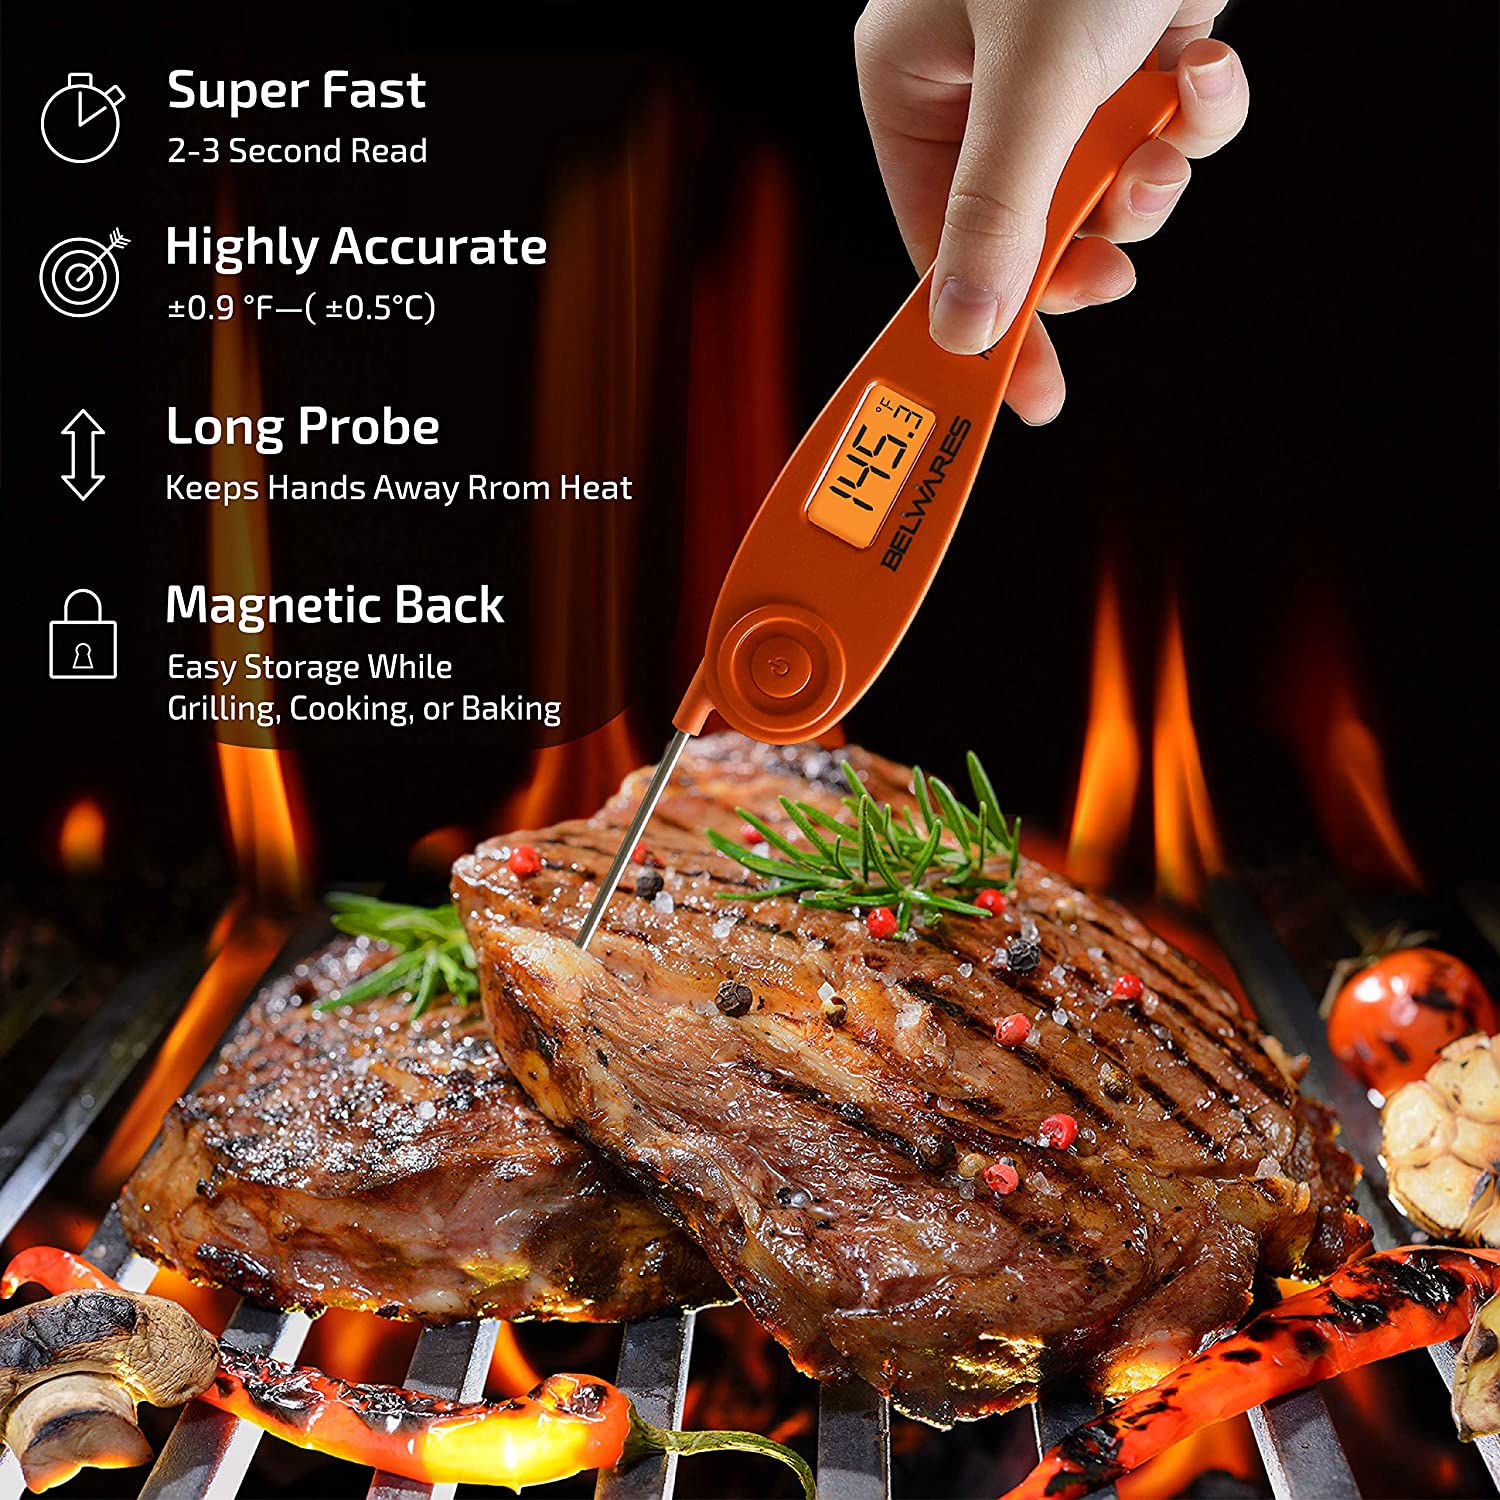 Digital Meat Thermometer for BBQ Grill Smoker Baking and Cooking, Instant  Read Temperature Thermometer with Foldable Stainless Steel Probe Reads Temp  within 4-7 Seconds - Belwares